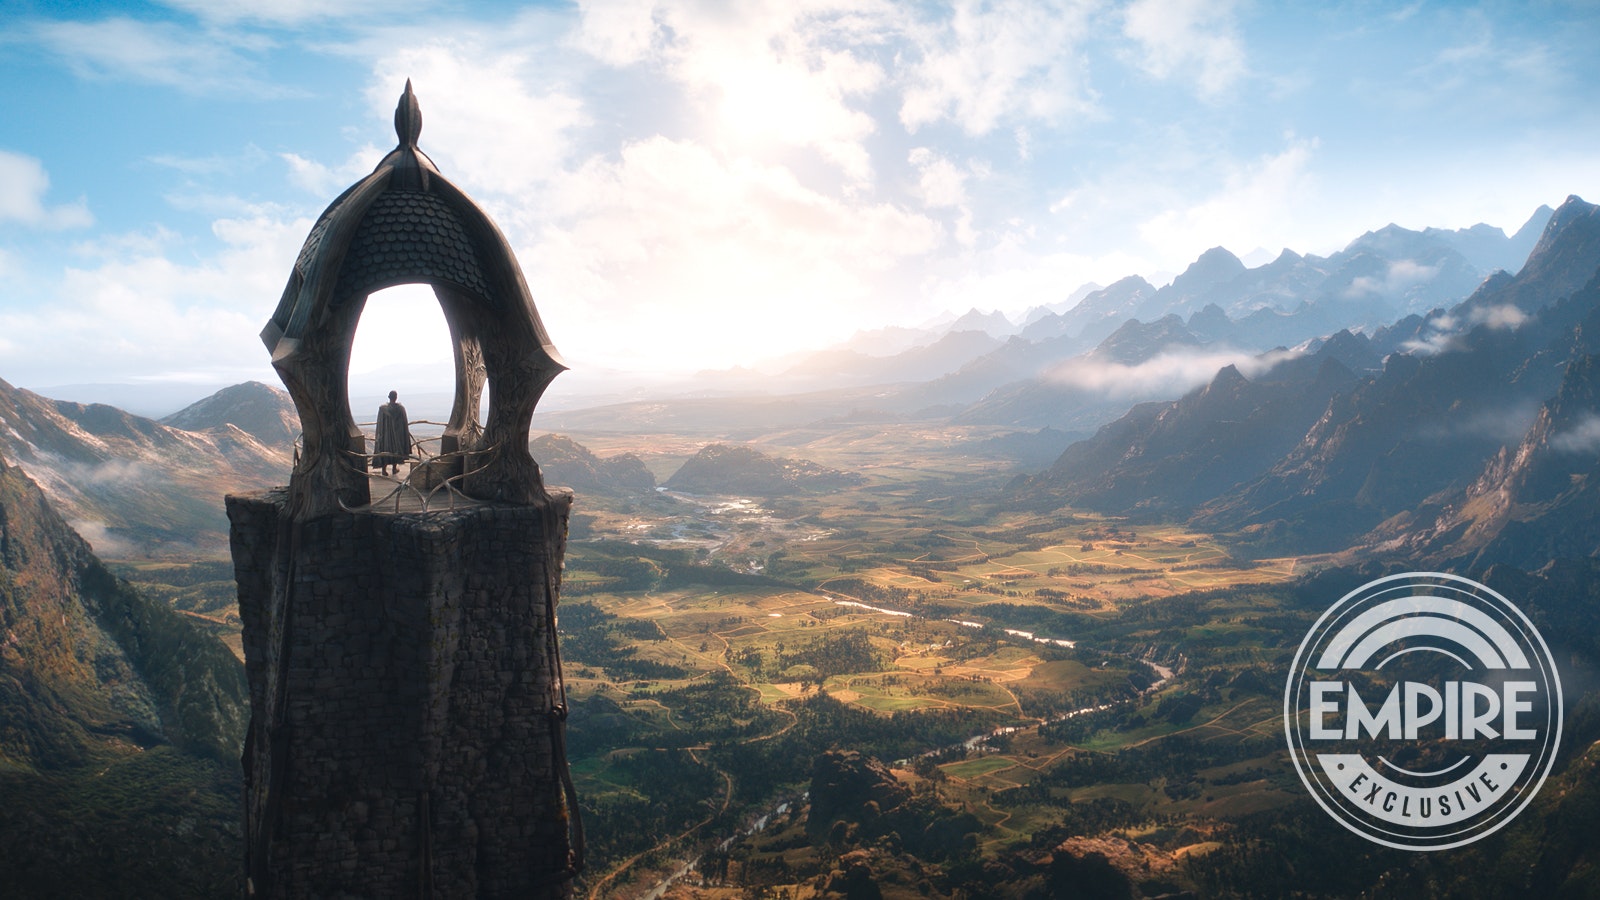 Visit Middle-earth with these exclusive new images from The Lord of the  Rings: The Rings of Power